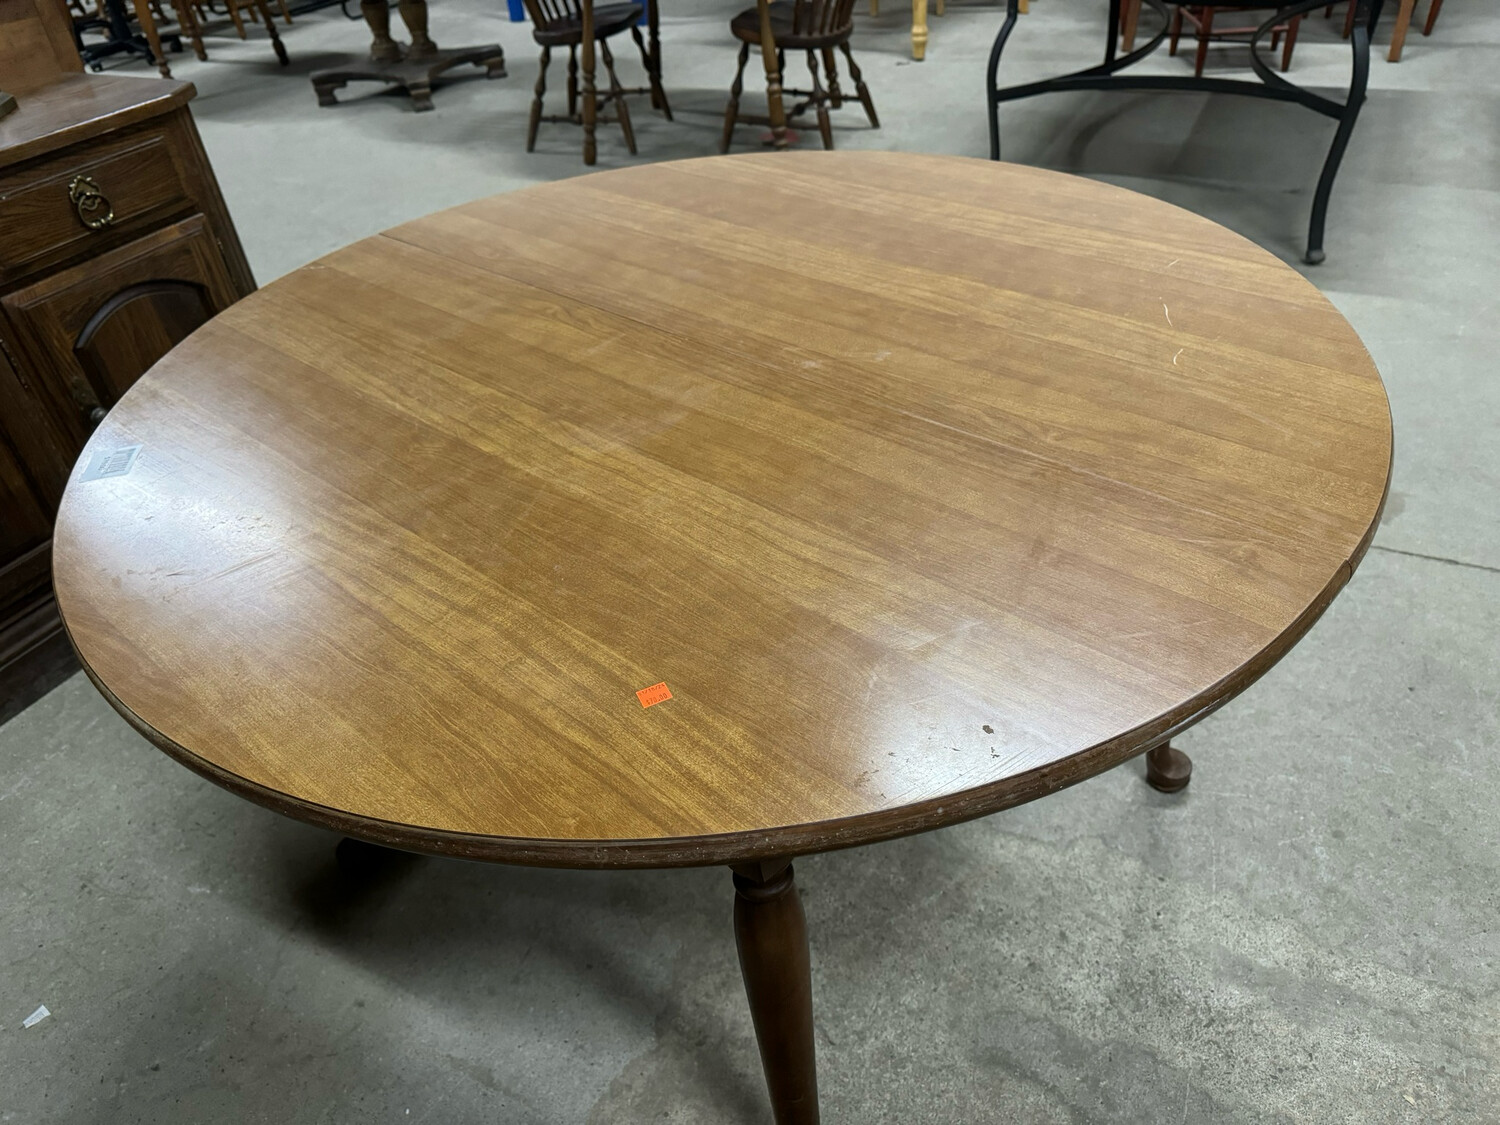 777162 round extendable table, expander missing